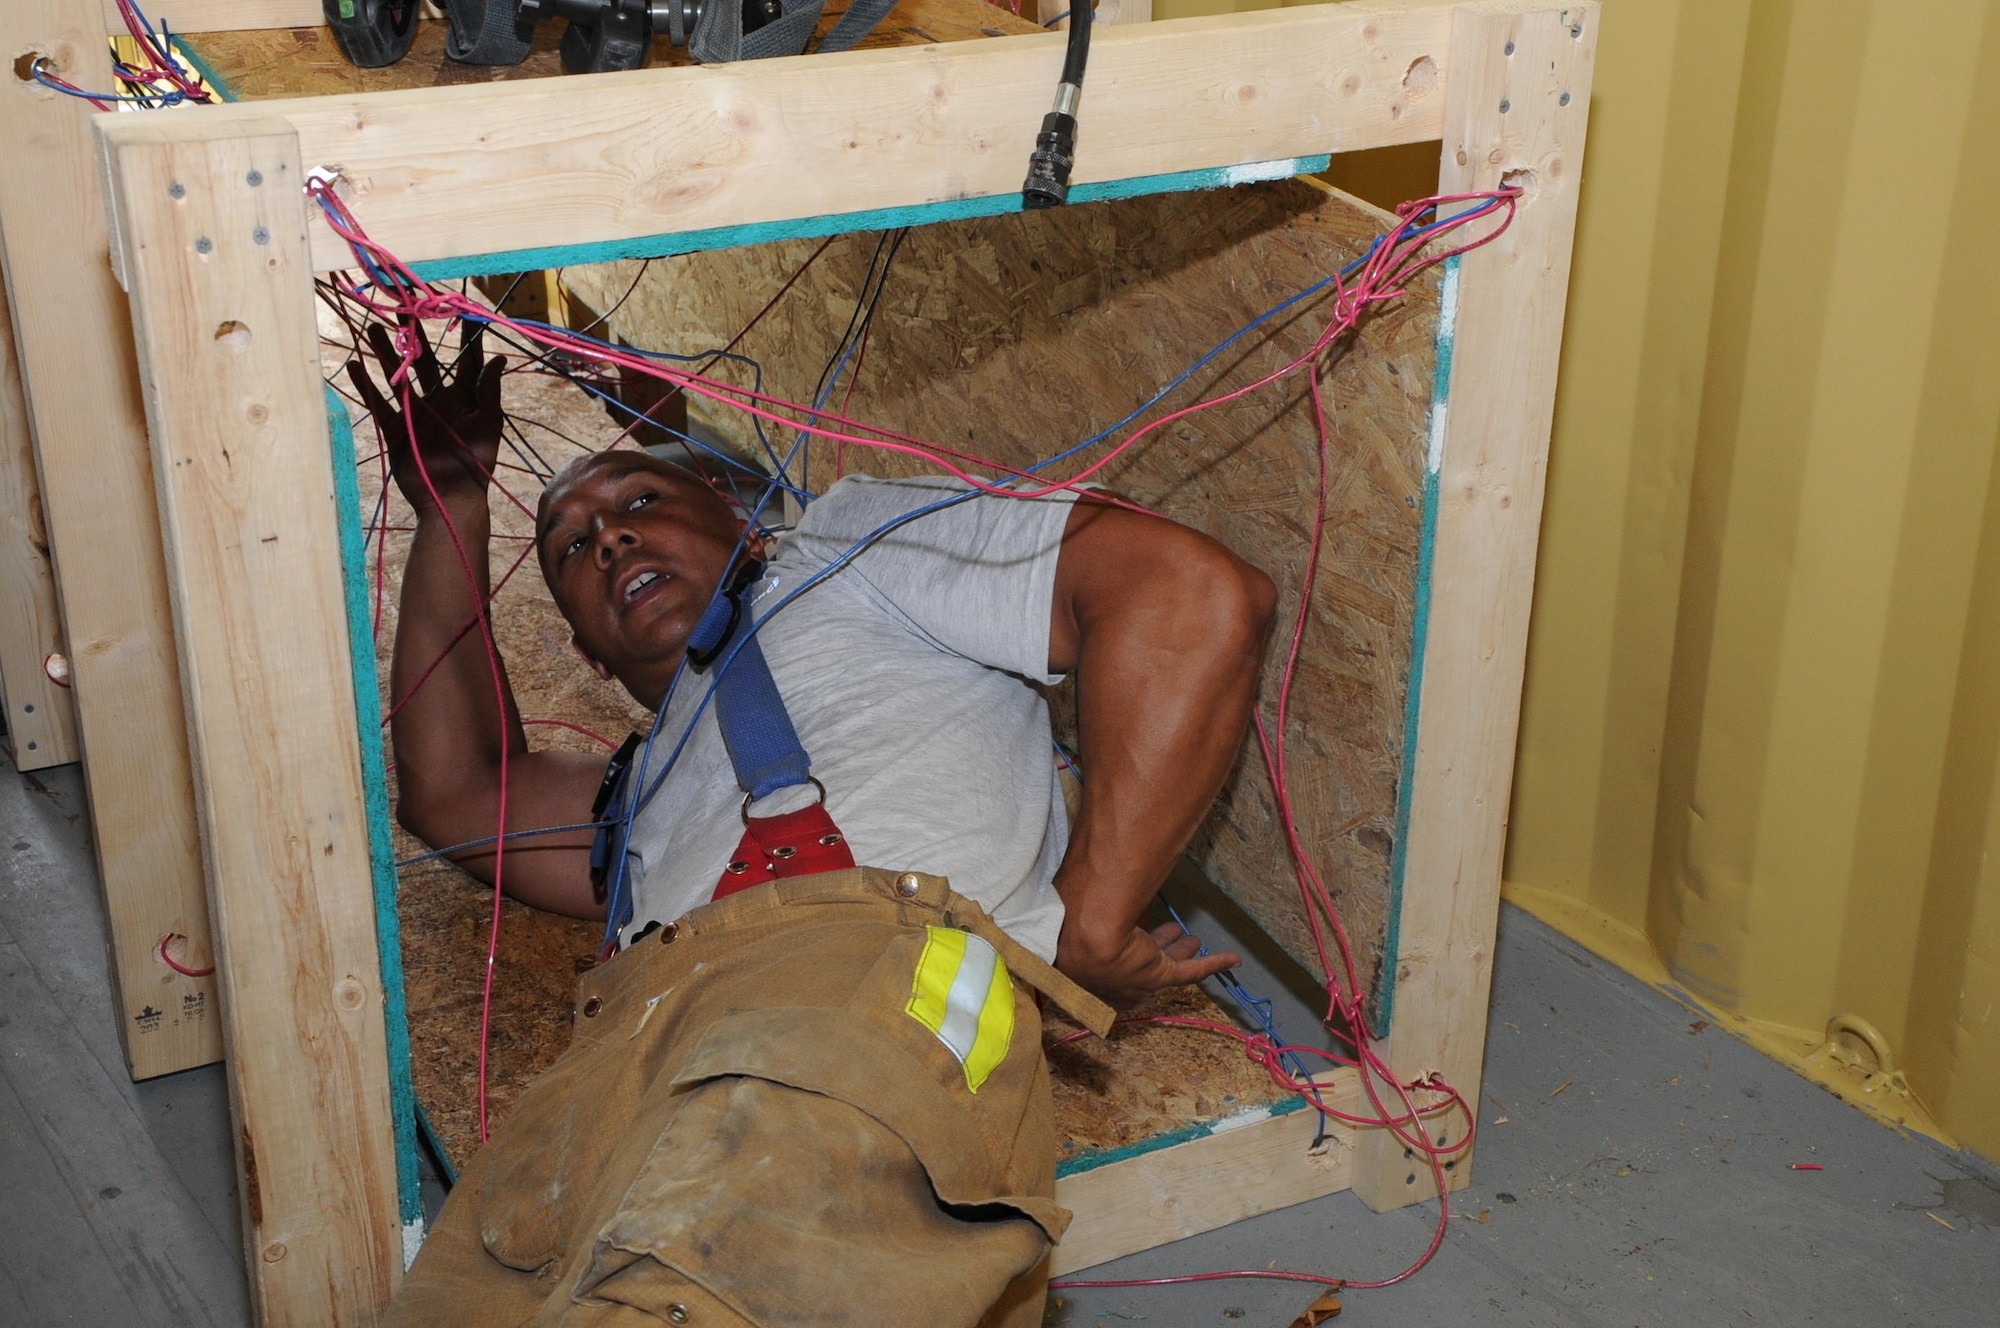 U.S. Air Force Master Sgt. Matthew Kaea, of Makakilo, Hawaii, a member of the 624th Civil Engineer Squadron from Joint Base Pearl Harbor-Hickam, Hawaii, demonstrates escape maneuvers using hanging wires and cables during the first-ever Air Force Reserve Command Firefighter Rescue and Survival Course at Dobbins Air Reserve Base, Ga., April 18, 2017. Twenty Citizen Airmen participated in the intense 50-hour course held at the 622nd Civil Engineer Group expeditionary combat support-training certification center, which focused on a Rapid Intervention Crew, or RIC. The RIC is a dedicated and specially trained group of firefighters whose responsibilities include safely evacuating a distressed firefighter from a structure. (U.S. Air Force photo by Master Sgt. Theanne K. Herrmann)